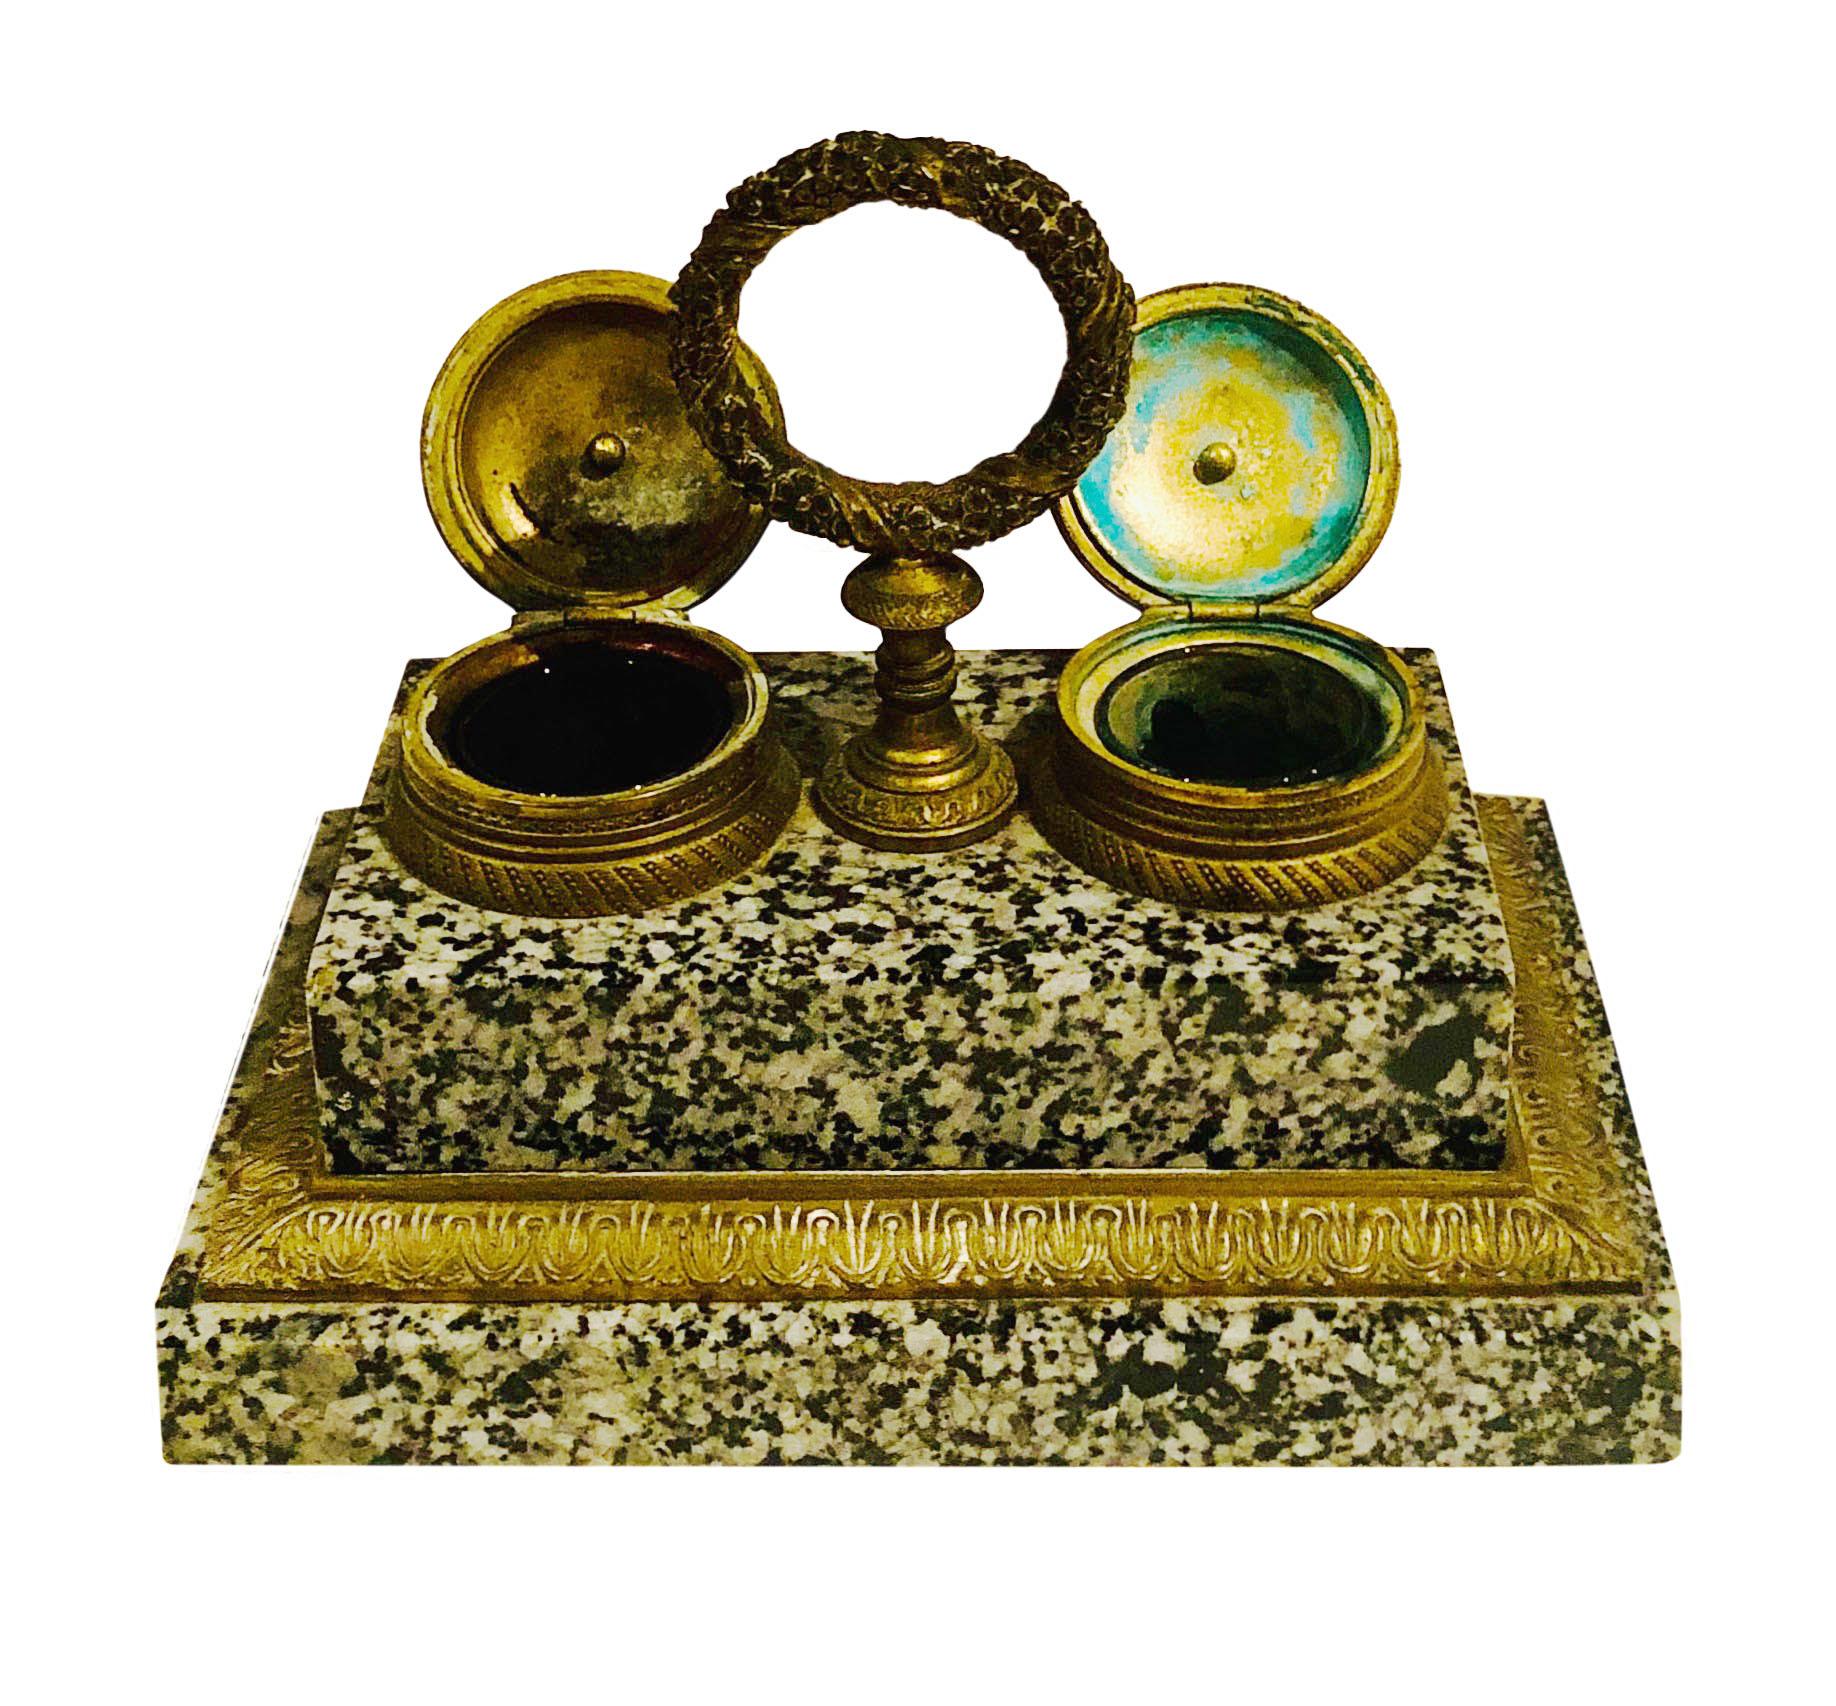 A doré bronze and marble inkwell. It is French in the Empire style. Compartments have their little glass containers for ink and are all original.